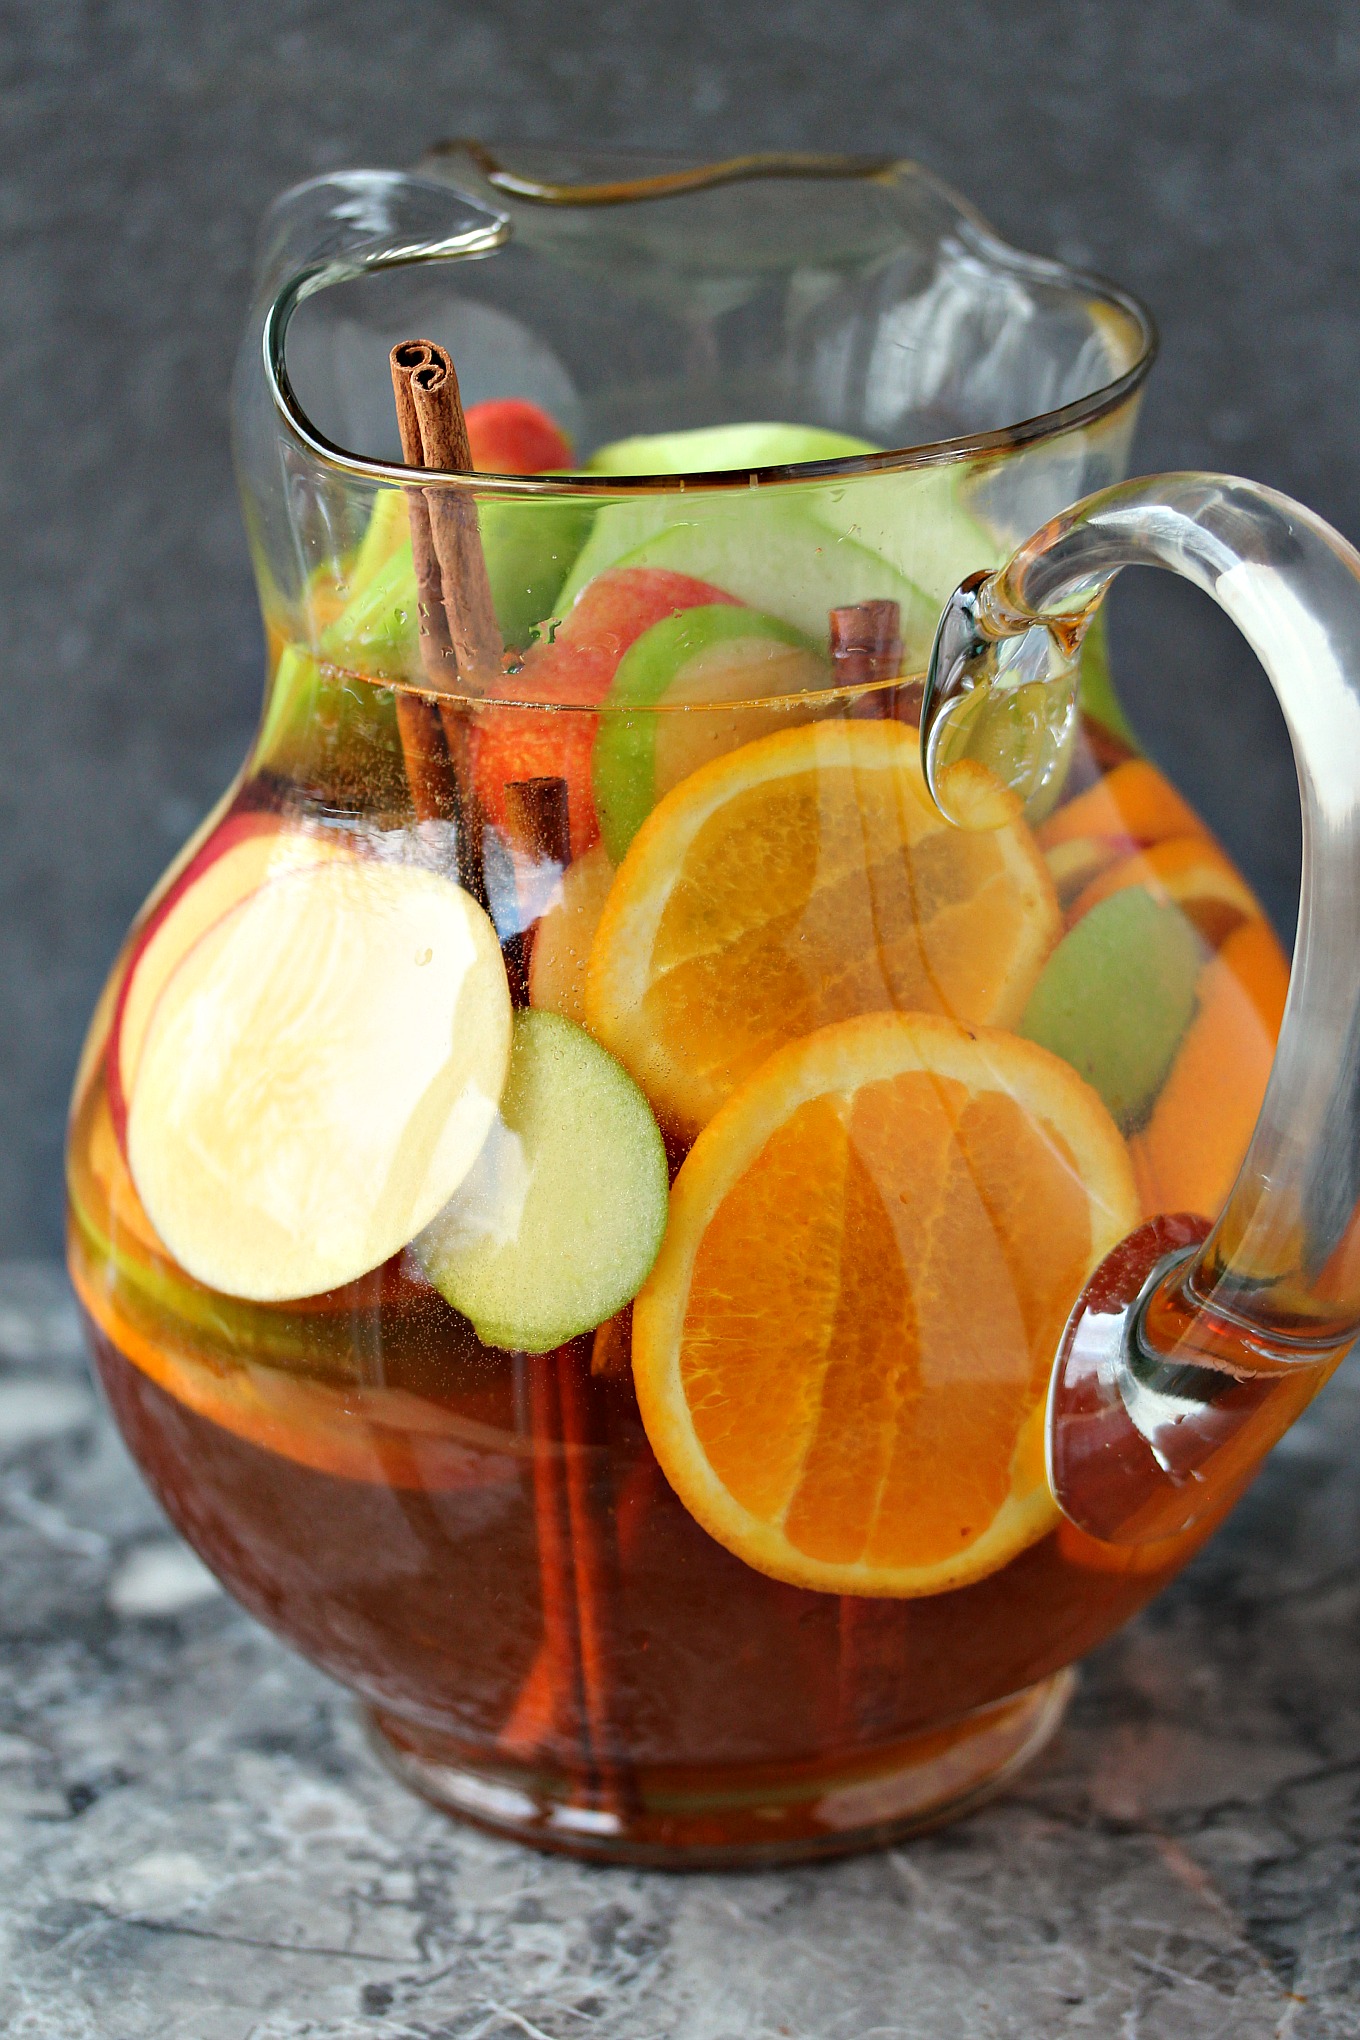 Apple sangria served in a clear glass pitcher with apple slices, orange slices and cinnamon sticks inside. Pitcher is on a grey marble counter.